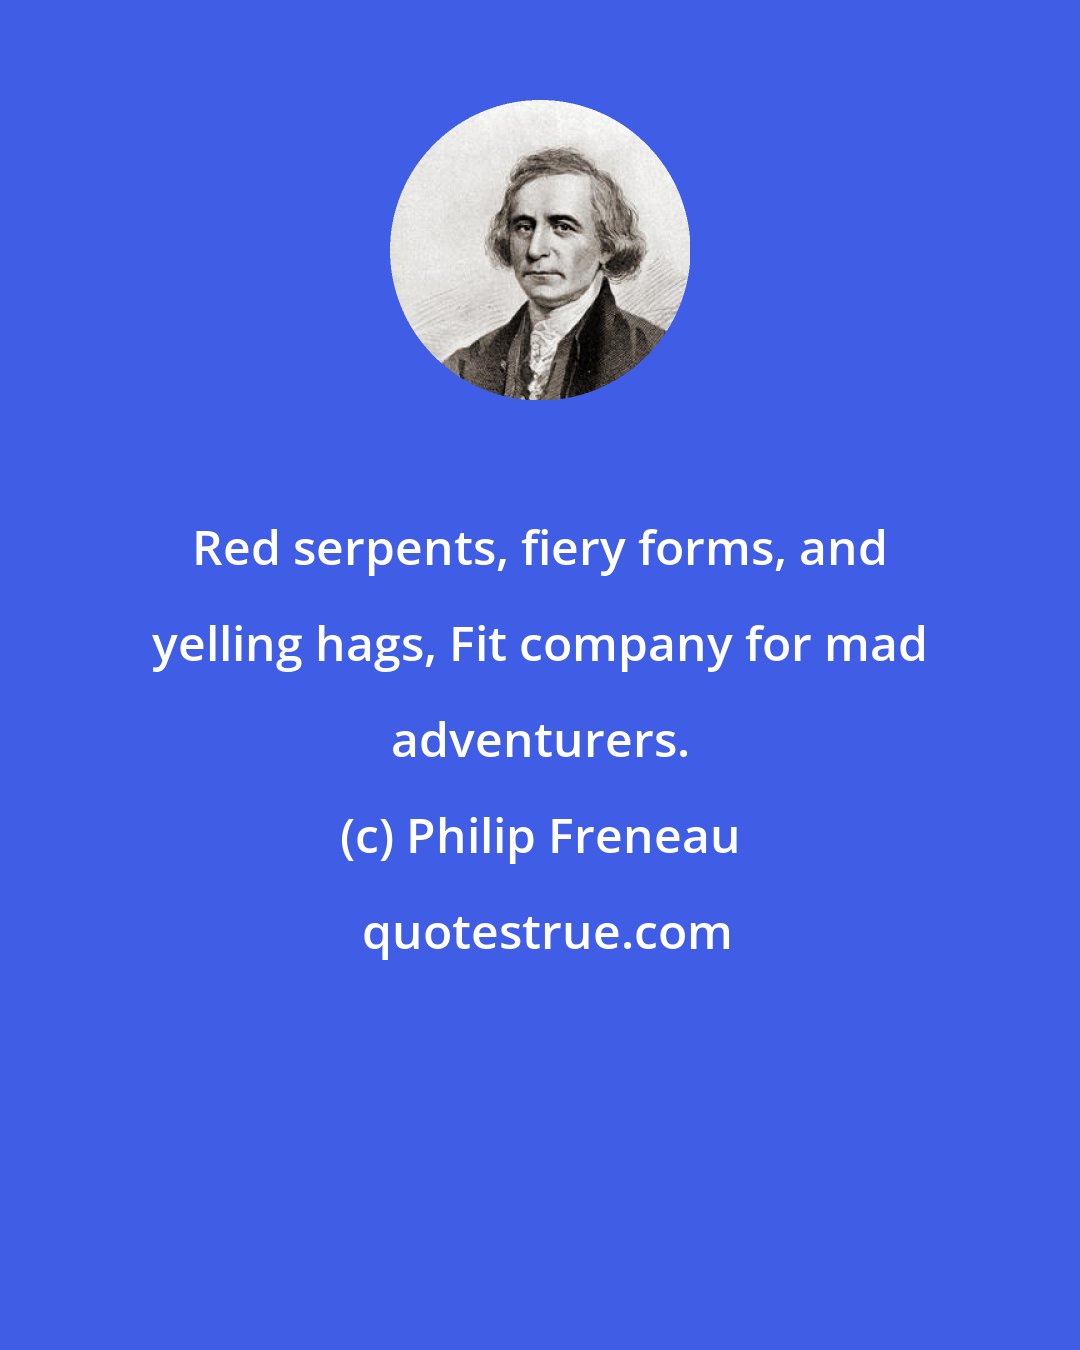 Philip Freneau: Red serpents, fiery forms, and yelling hags, Fit company for mad adventurers.